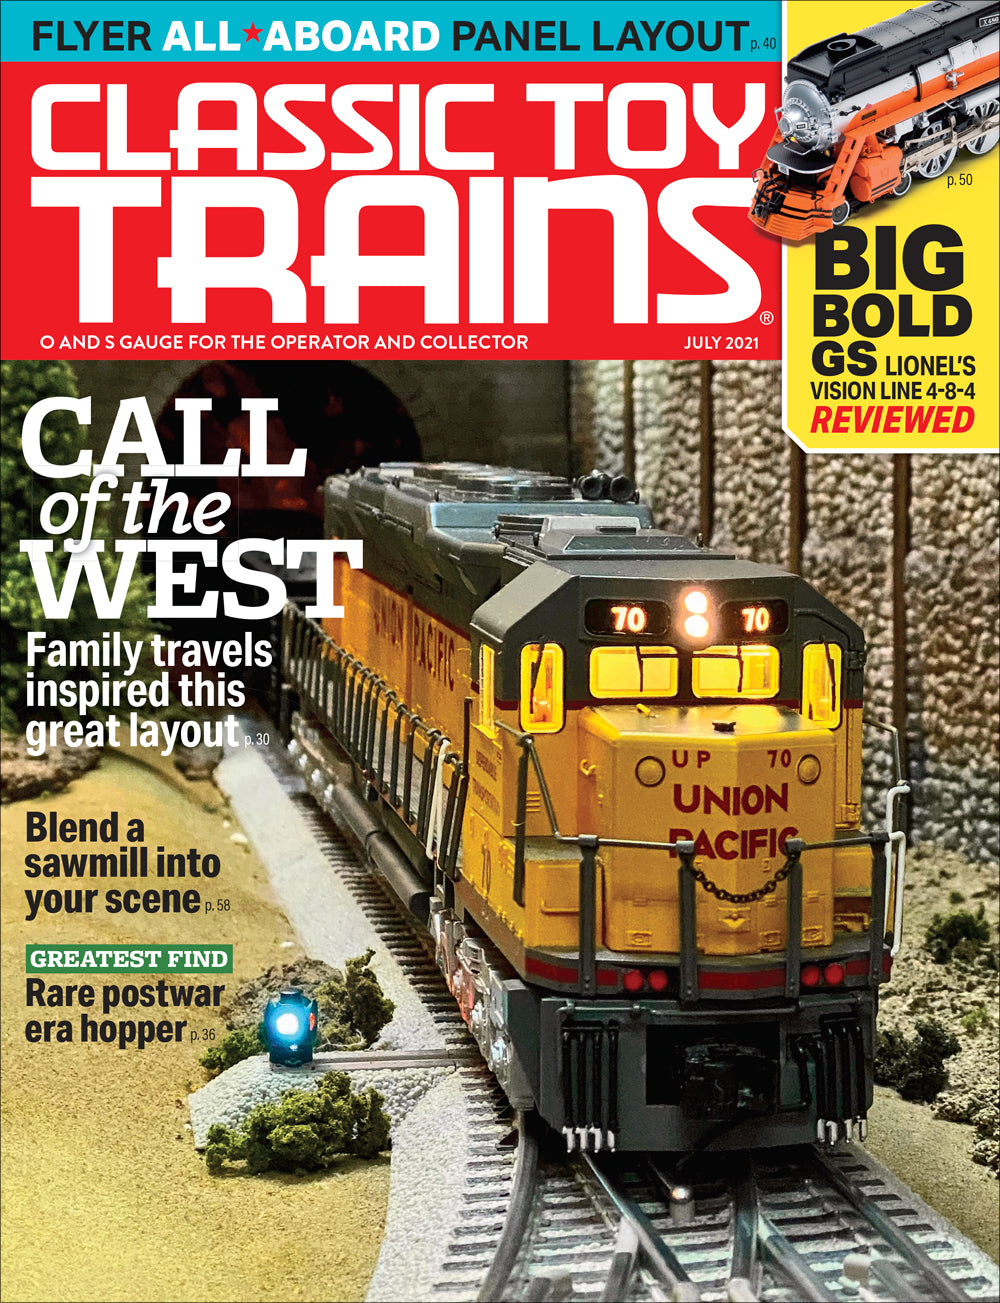 Classic Toy Trains - Magazine - Vol.34 - Issue 05 - July 2021